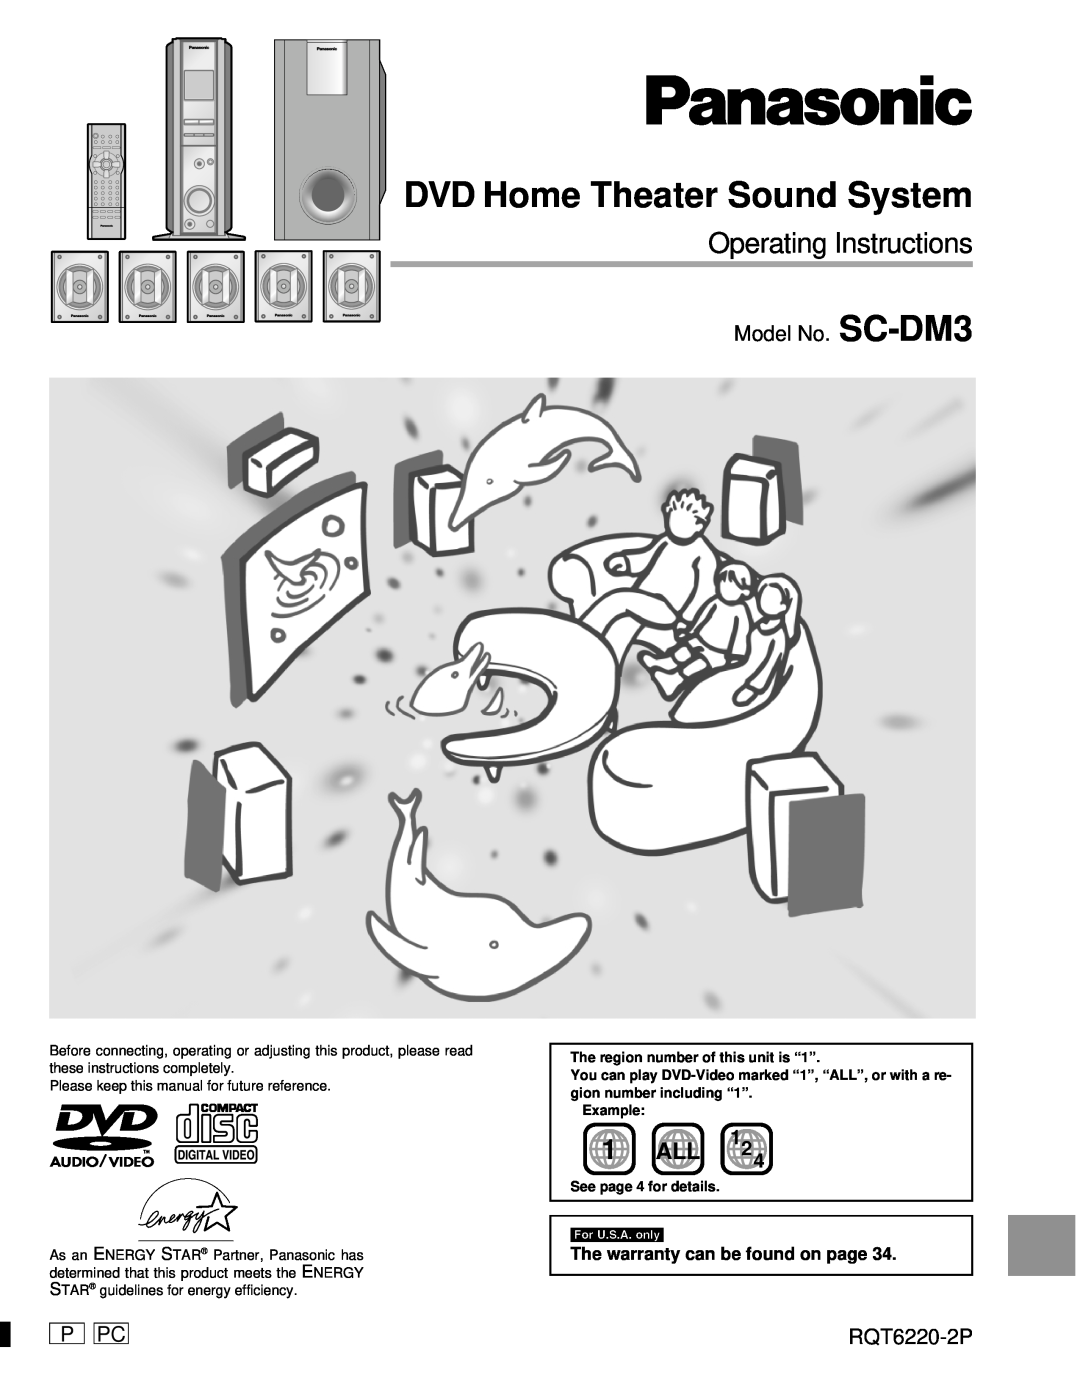 Panasonic warranty DVD Home Theater Sound System, 1ALL, Model No. SC-DM3, P Pc, RQT6220-2P, Operating Instructions 